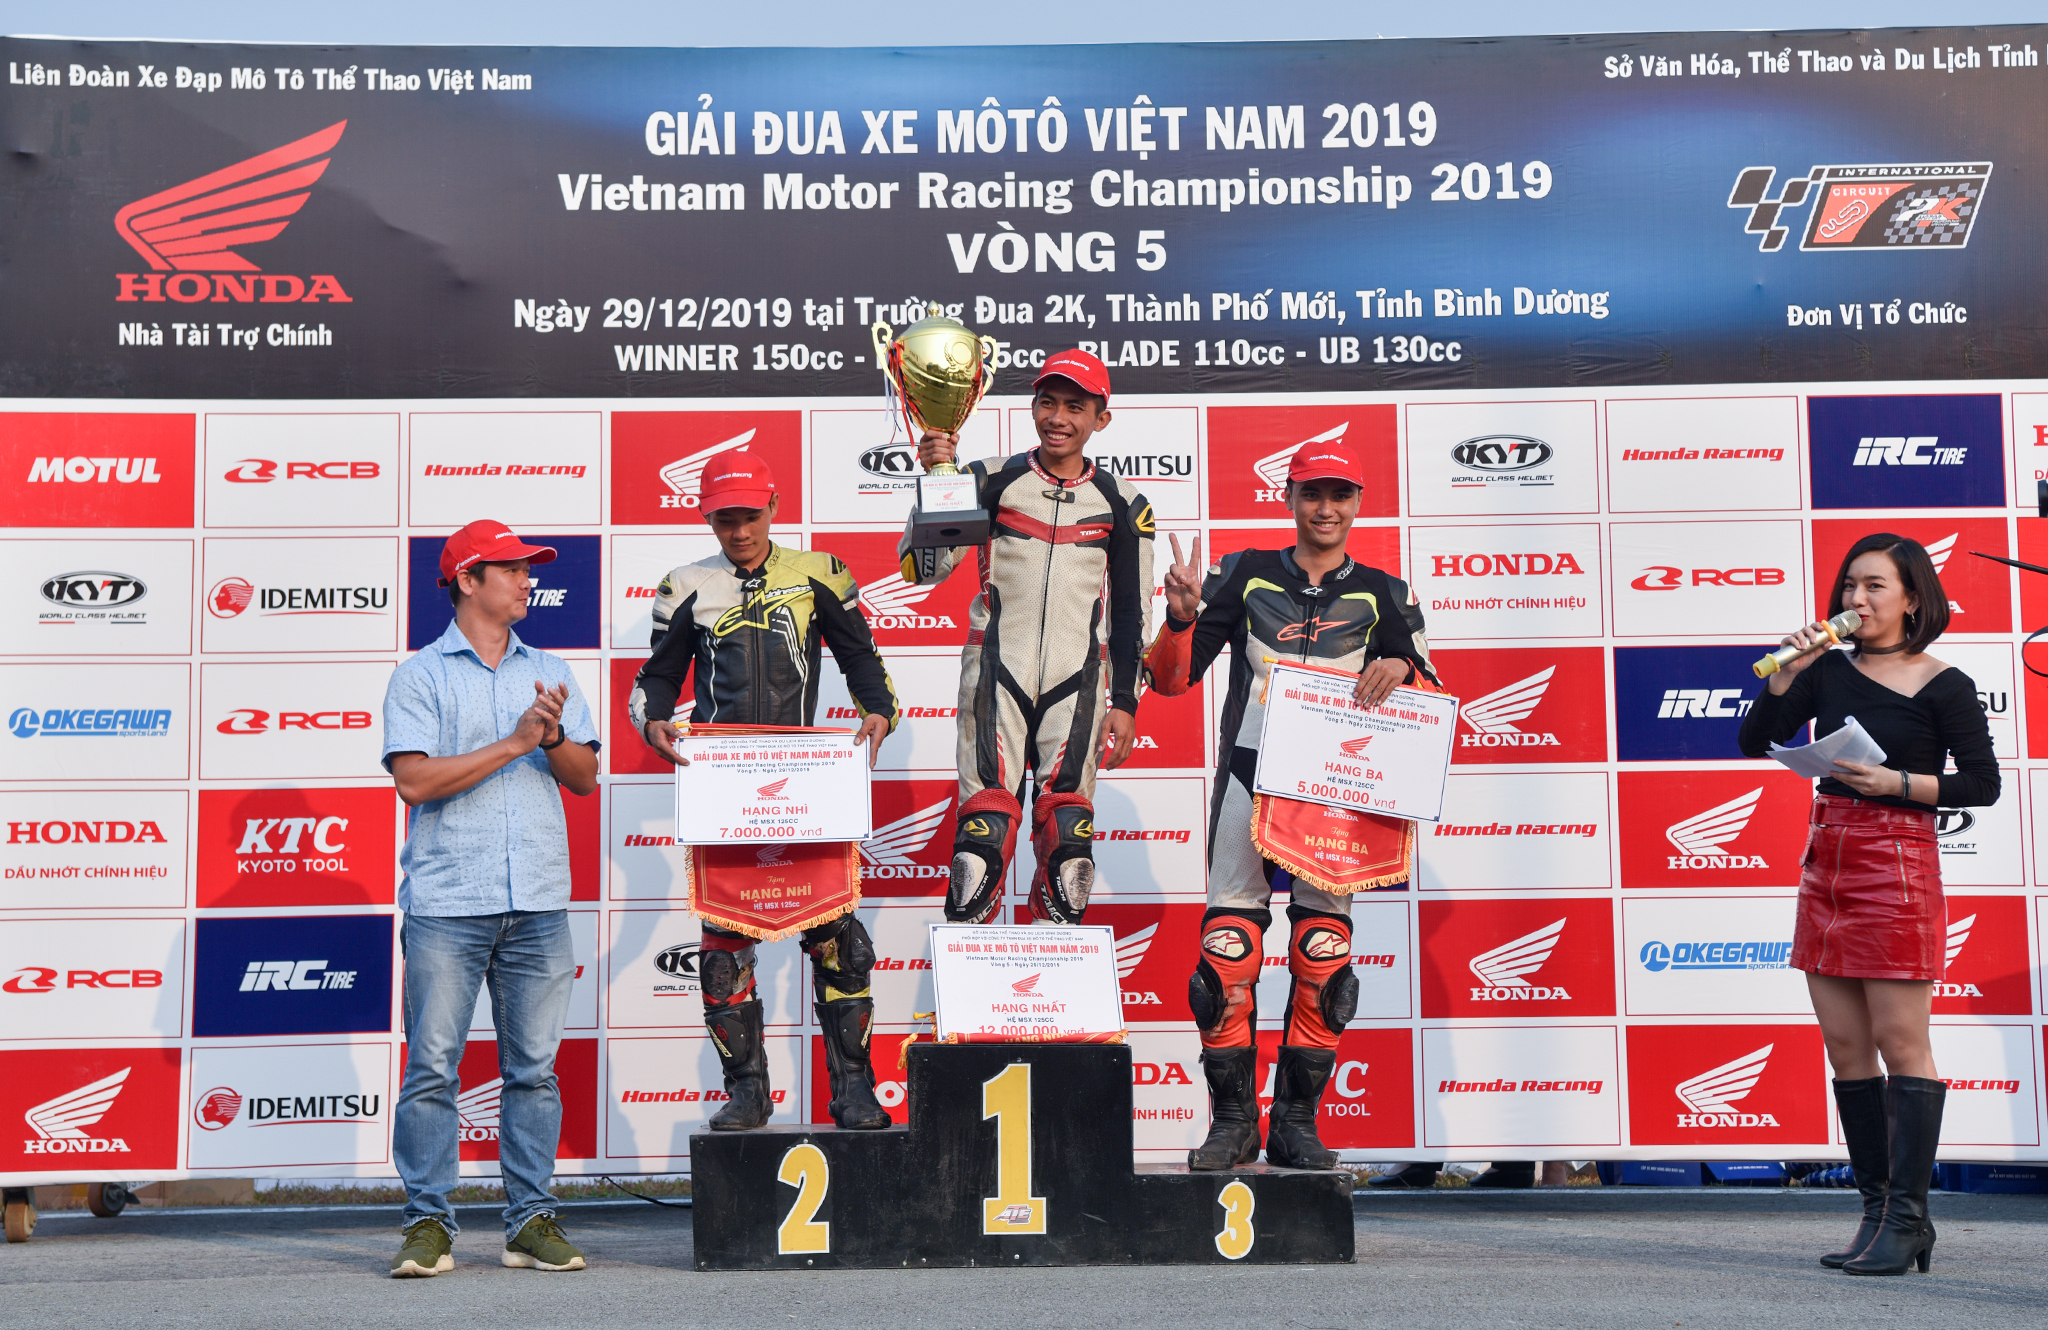 VMRC 2019 stage 5: Surprises, drama and the first champion revealed dsc-3919-copy.jpg